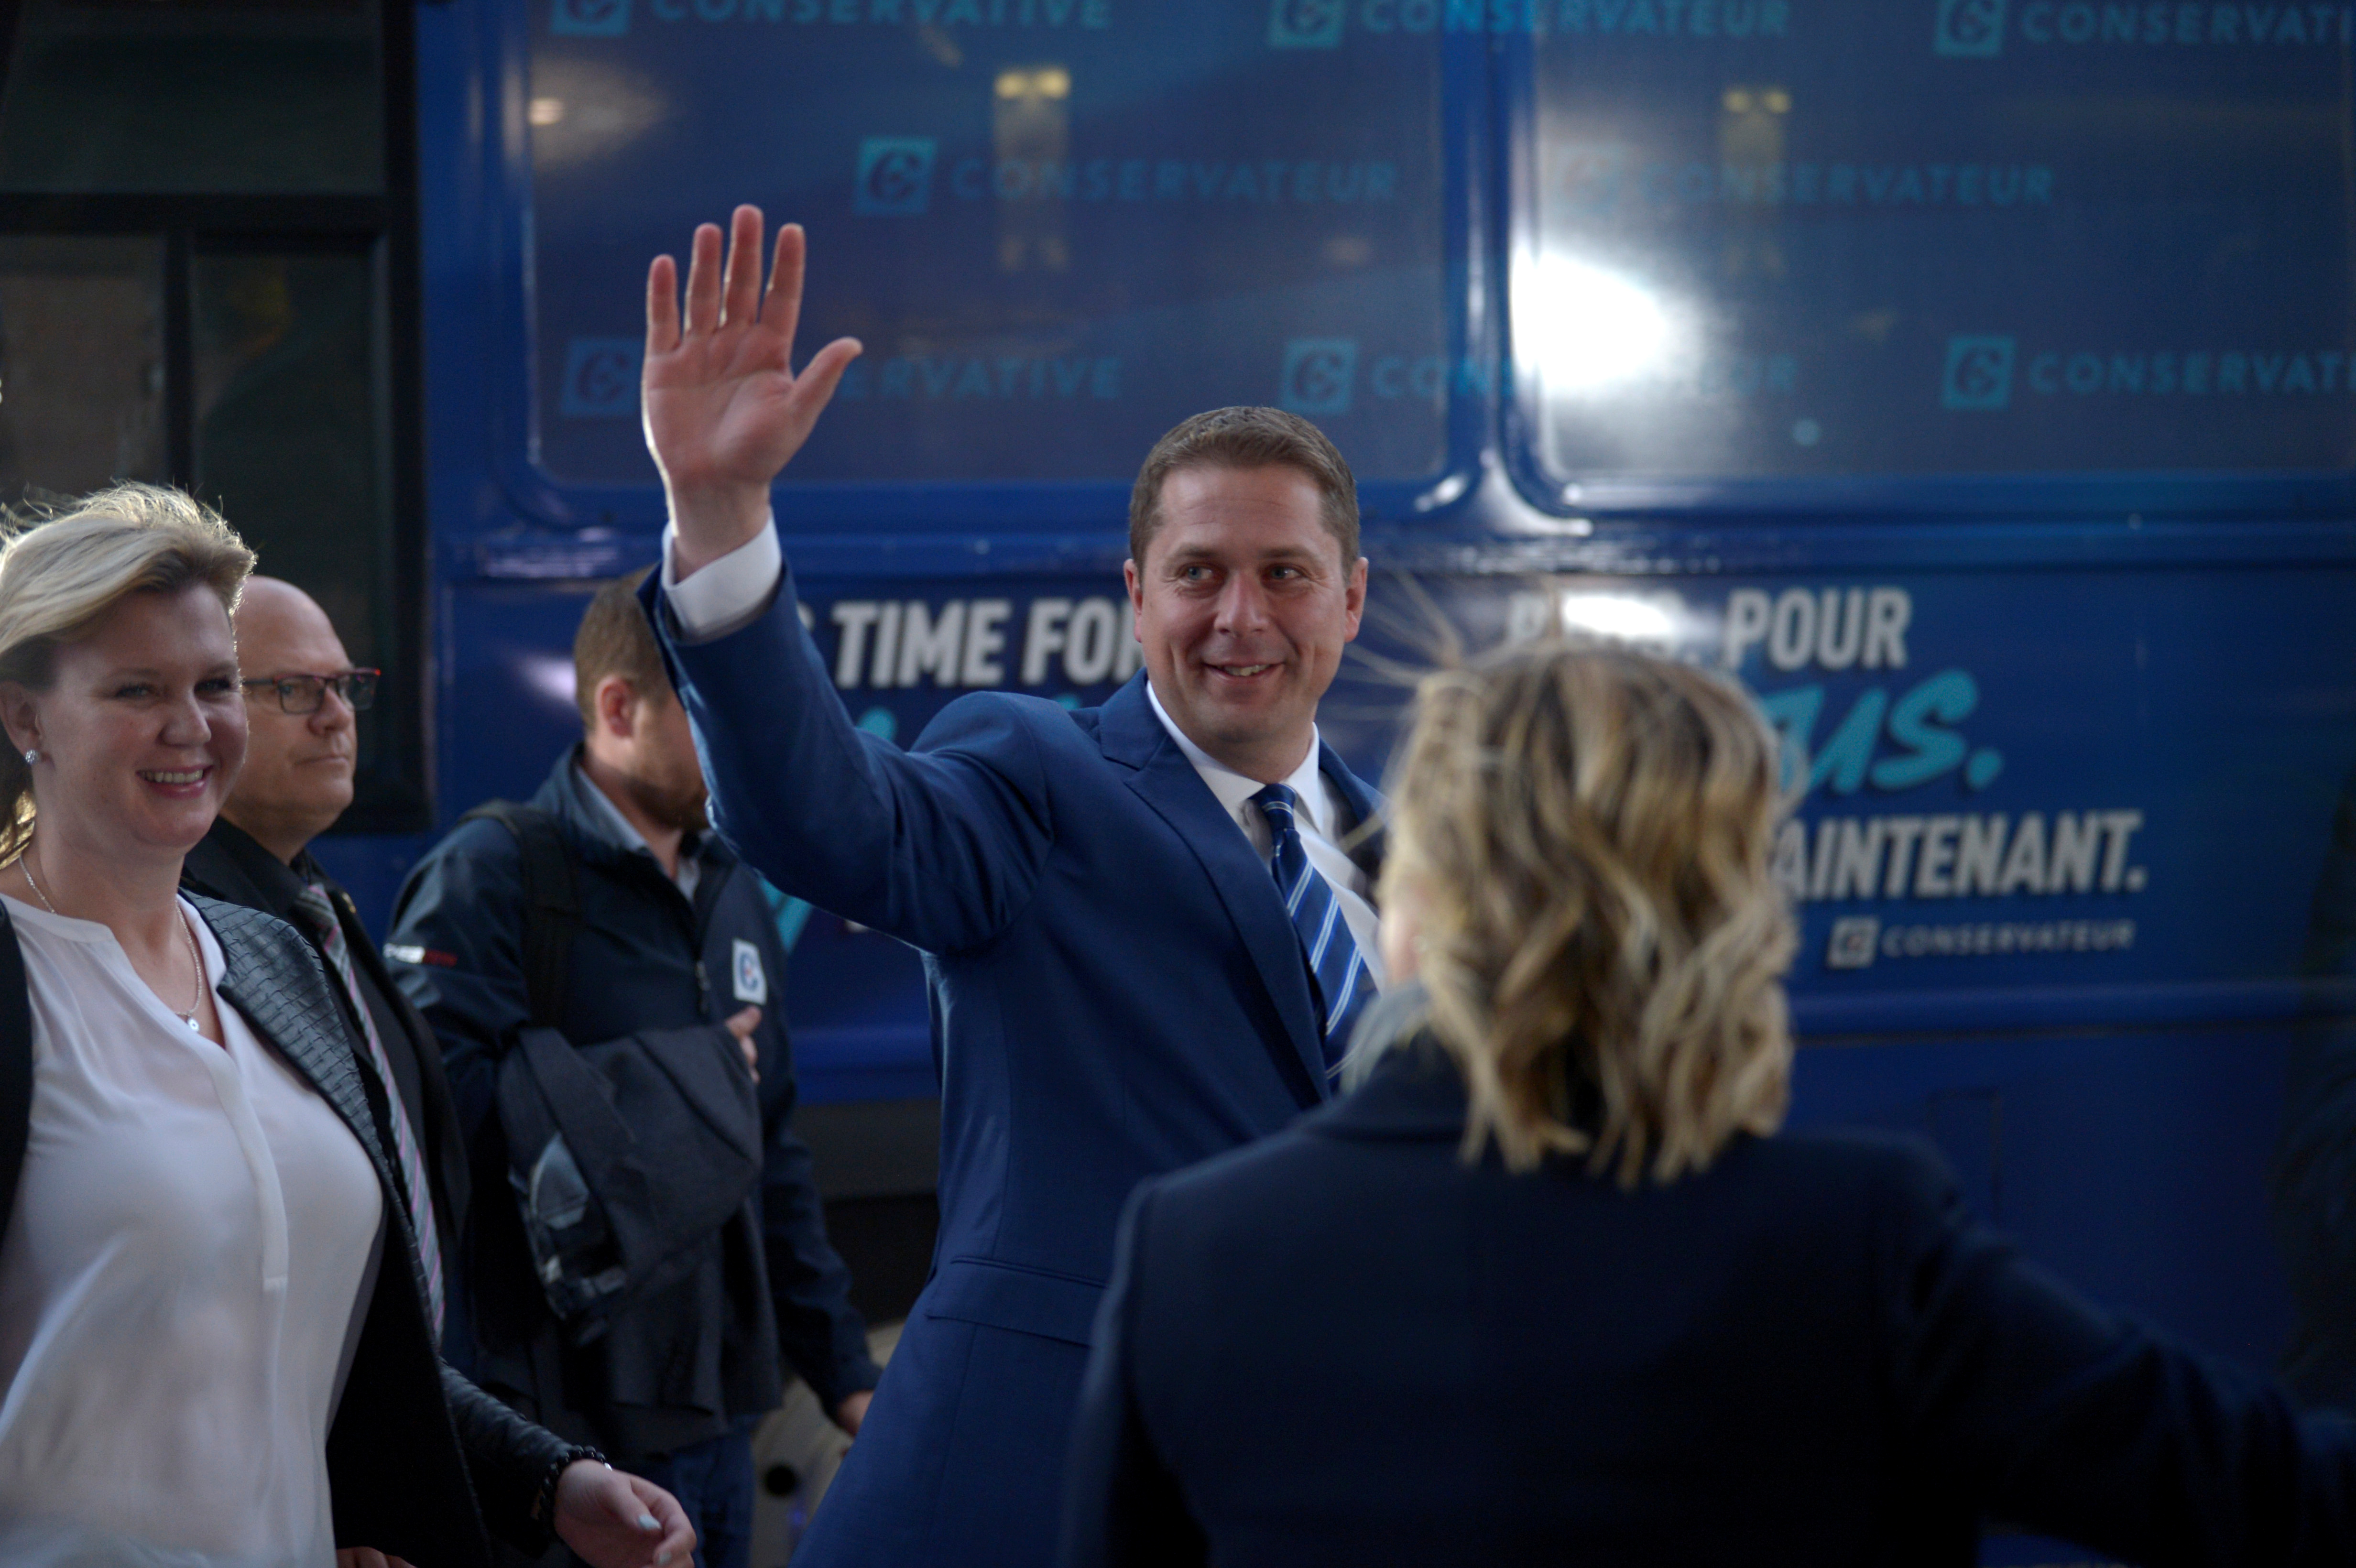 Conservative leader Andrew Scheer arrives to the French televised debate at TVA in Montreal, Quebec, Canada October 2, 2019. REUTERS/Andrej Ivanov 